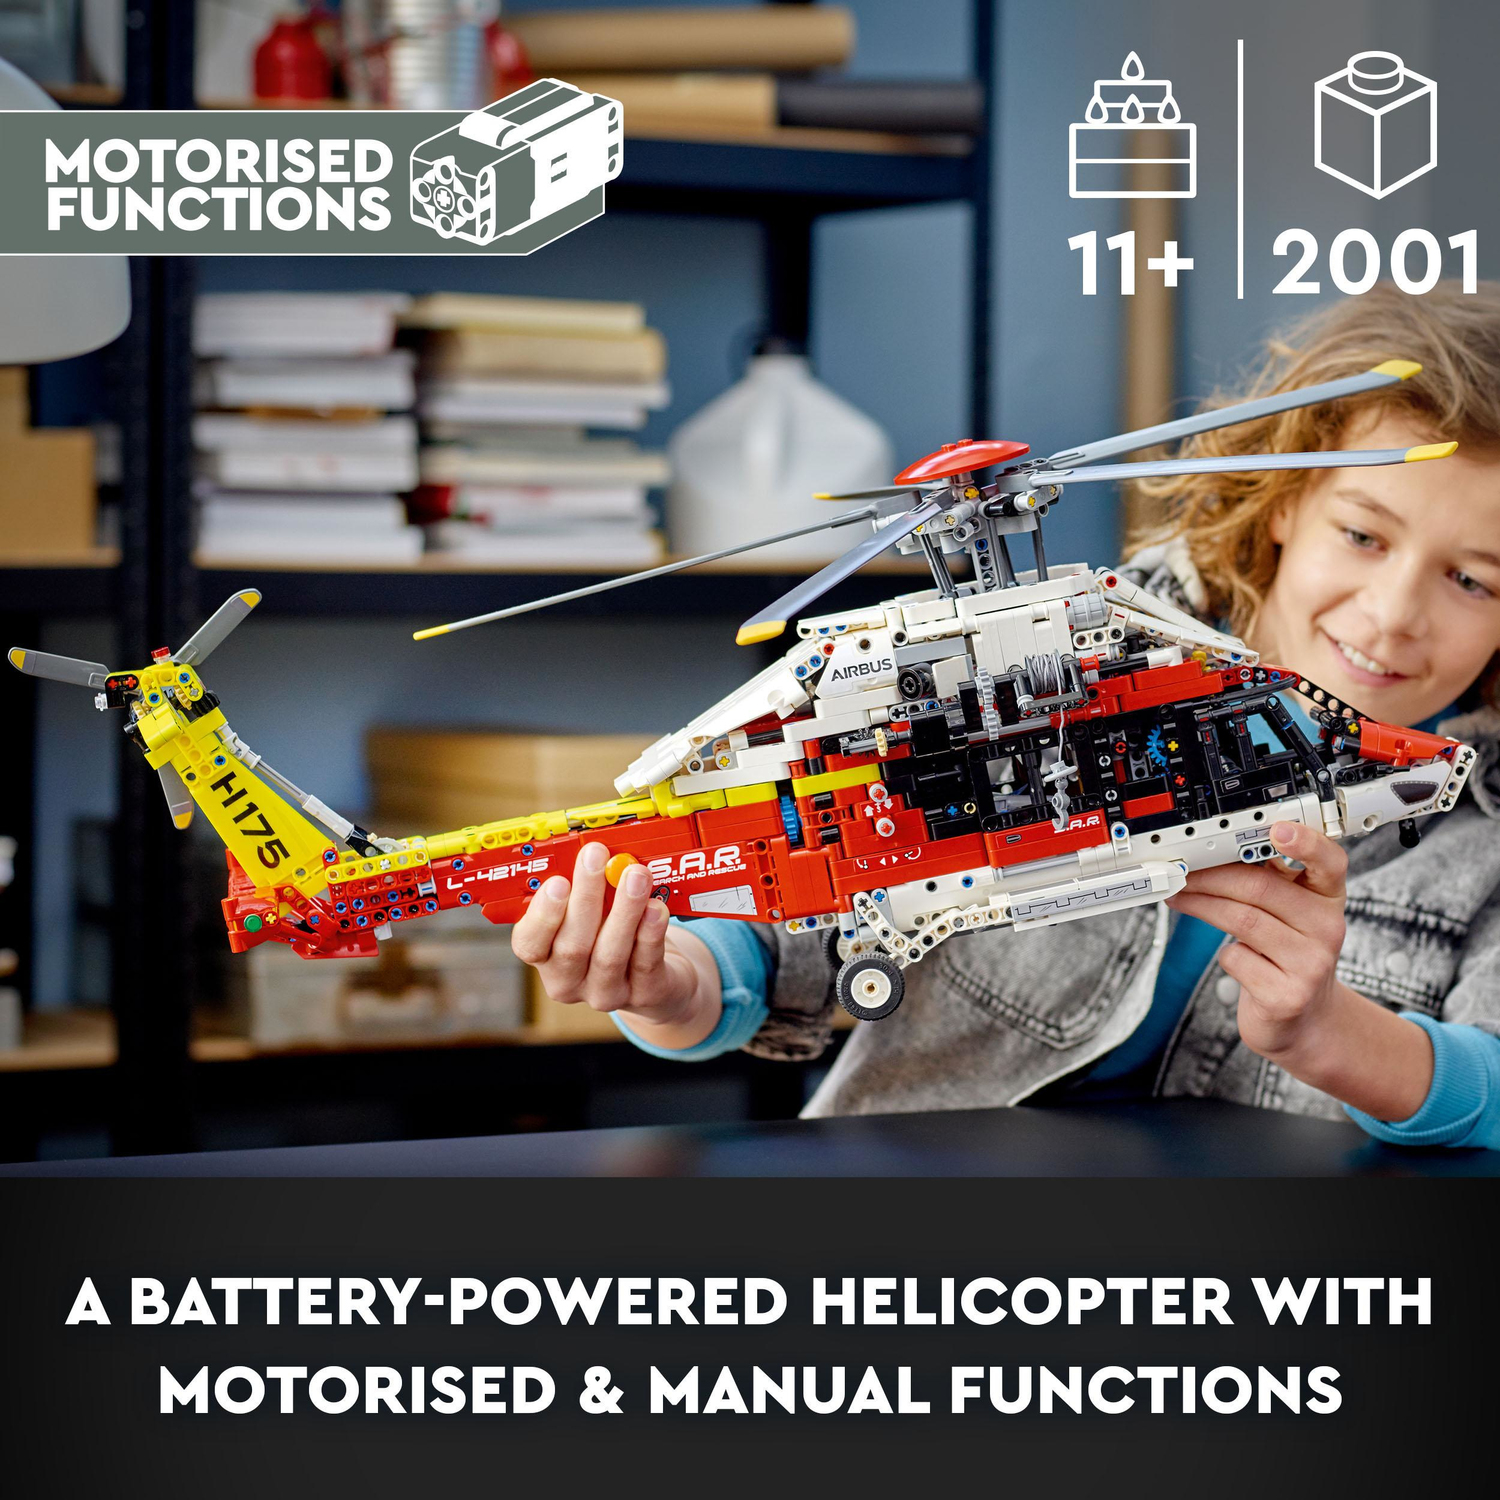 Technic Airbus H175 Rescue Helicopter Toy - Toyrifix